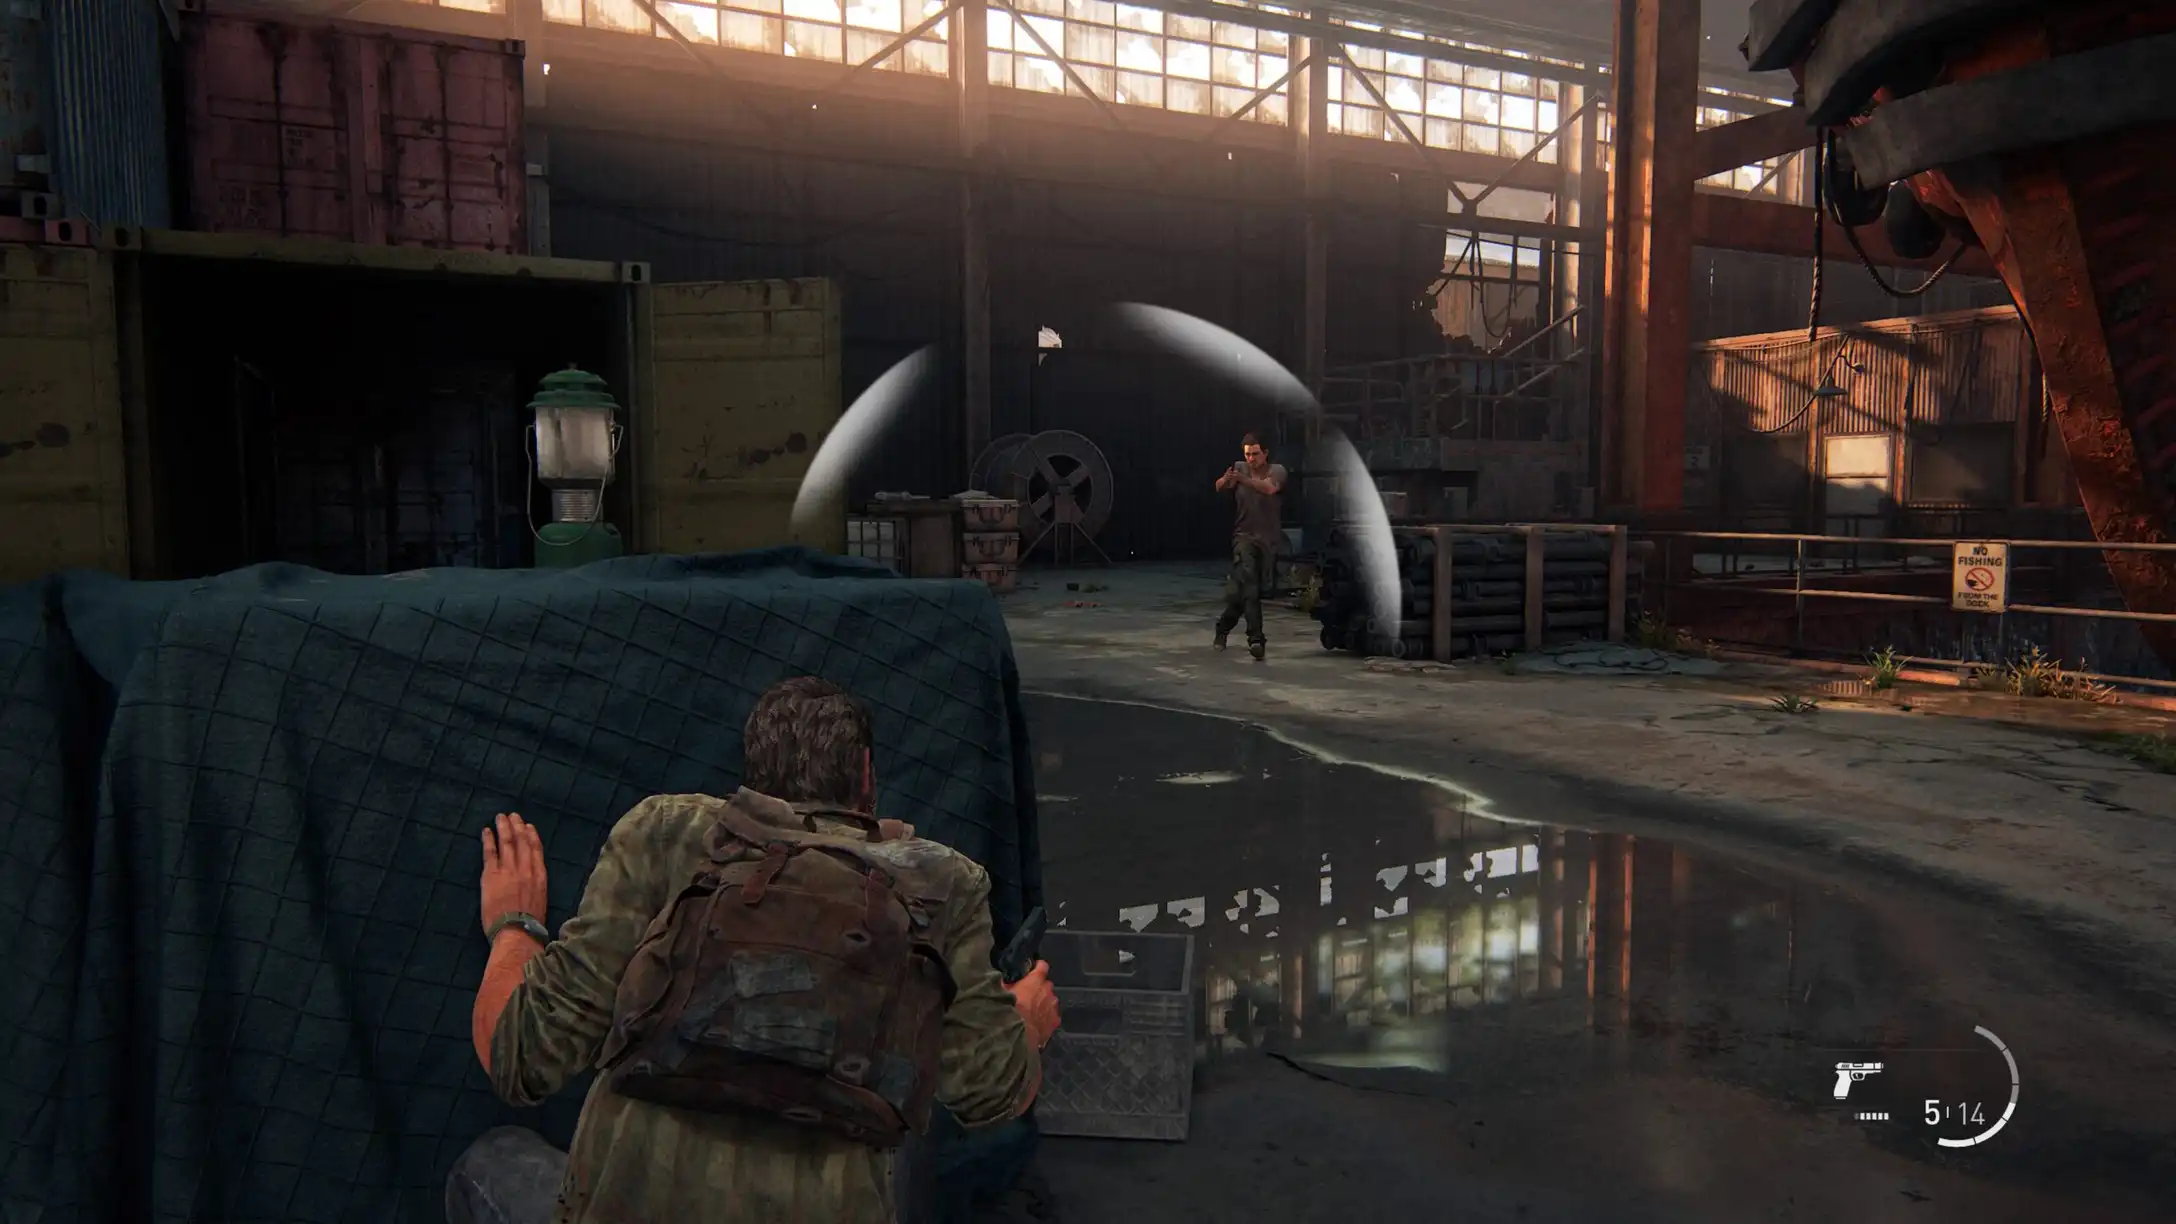 The Last of Us Part I: Joel crouched behind cover with visible threat indicator UI elements.